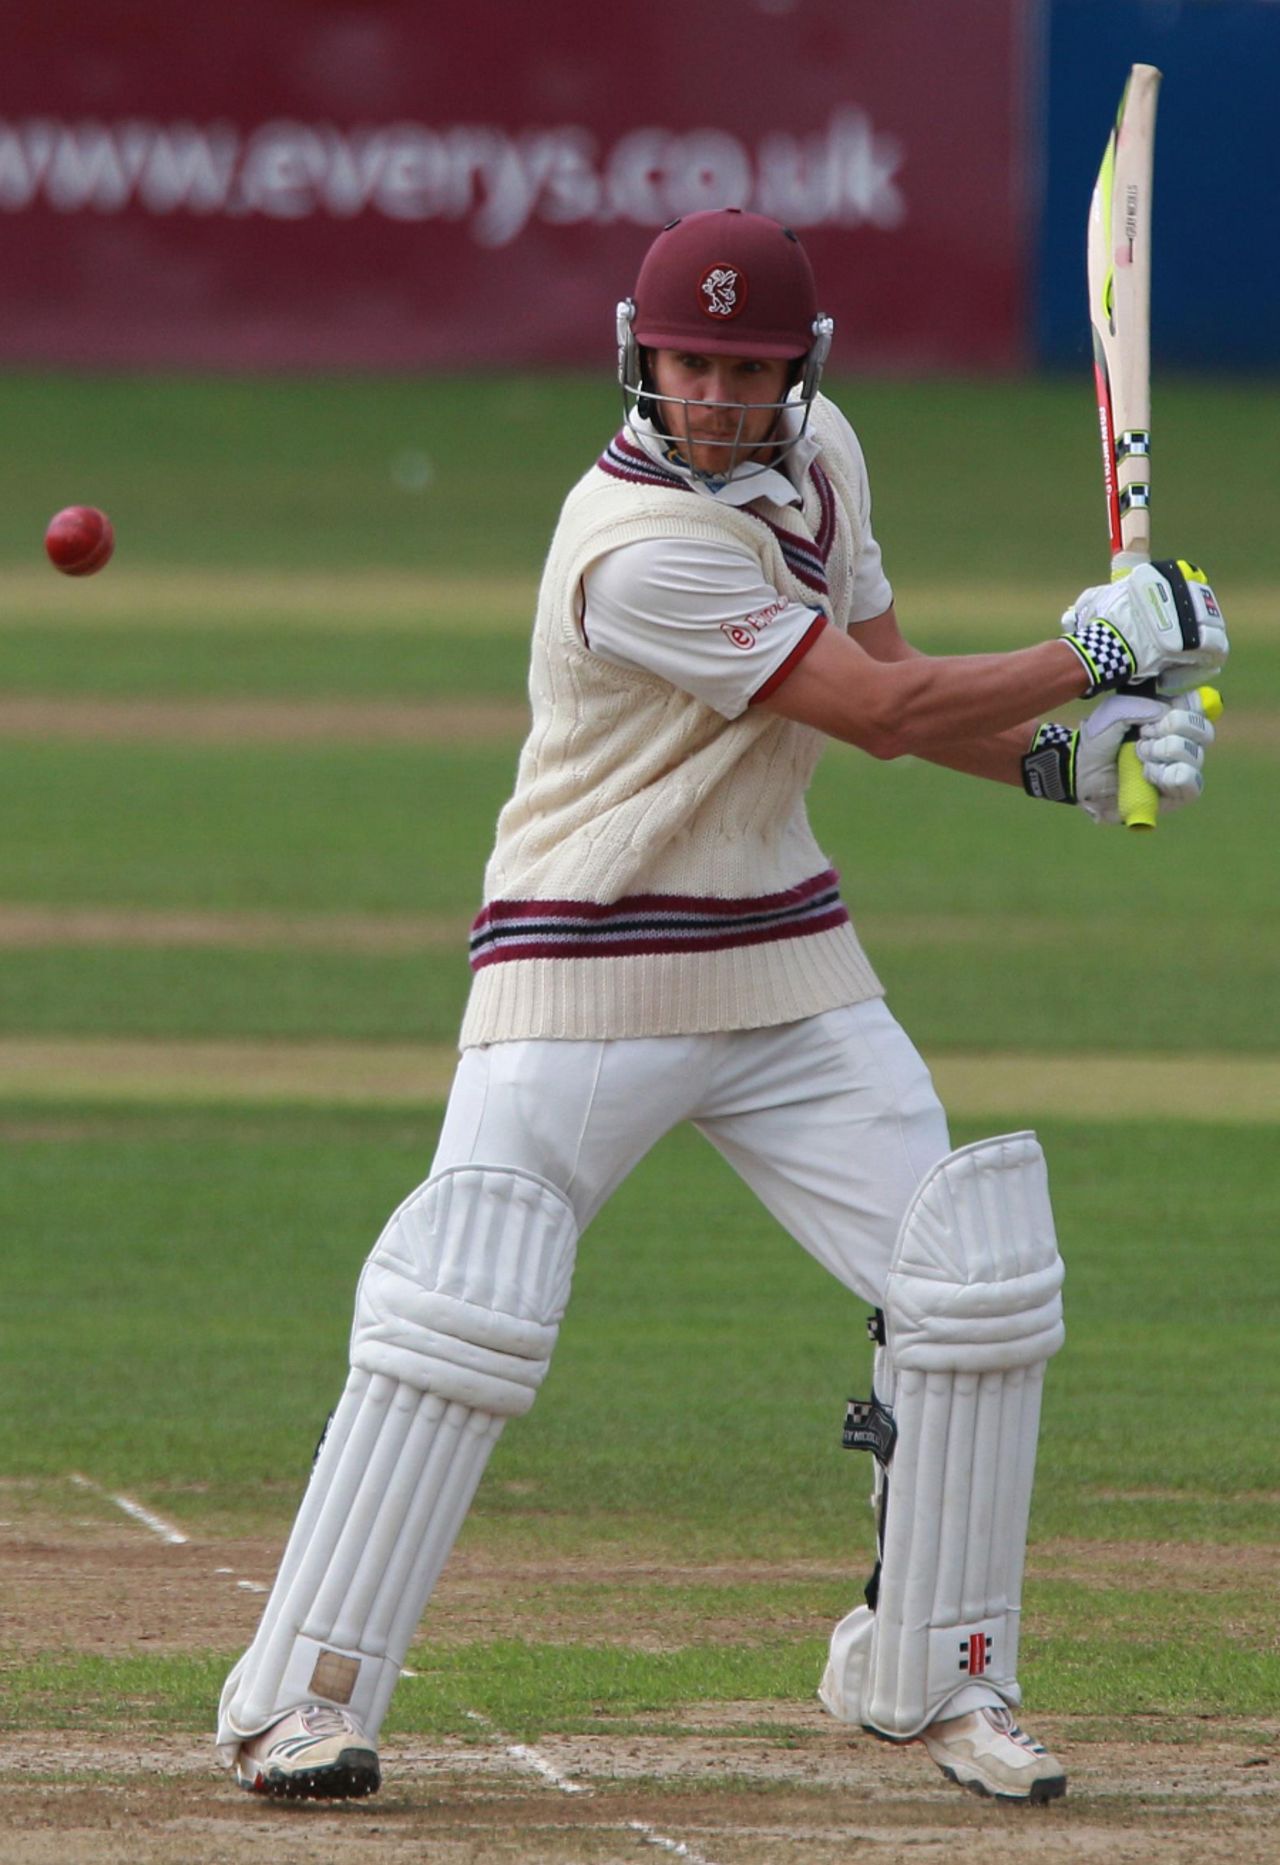 James Hildreth cuts during his hundred against Lancashire, Somerset v Lancashire, County Championship, Division One, Taunton, September 12, 2011